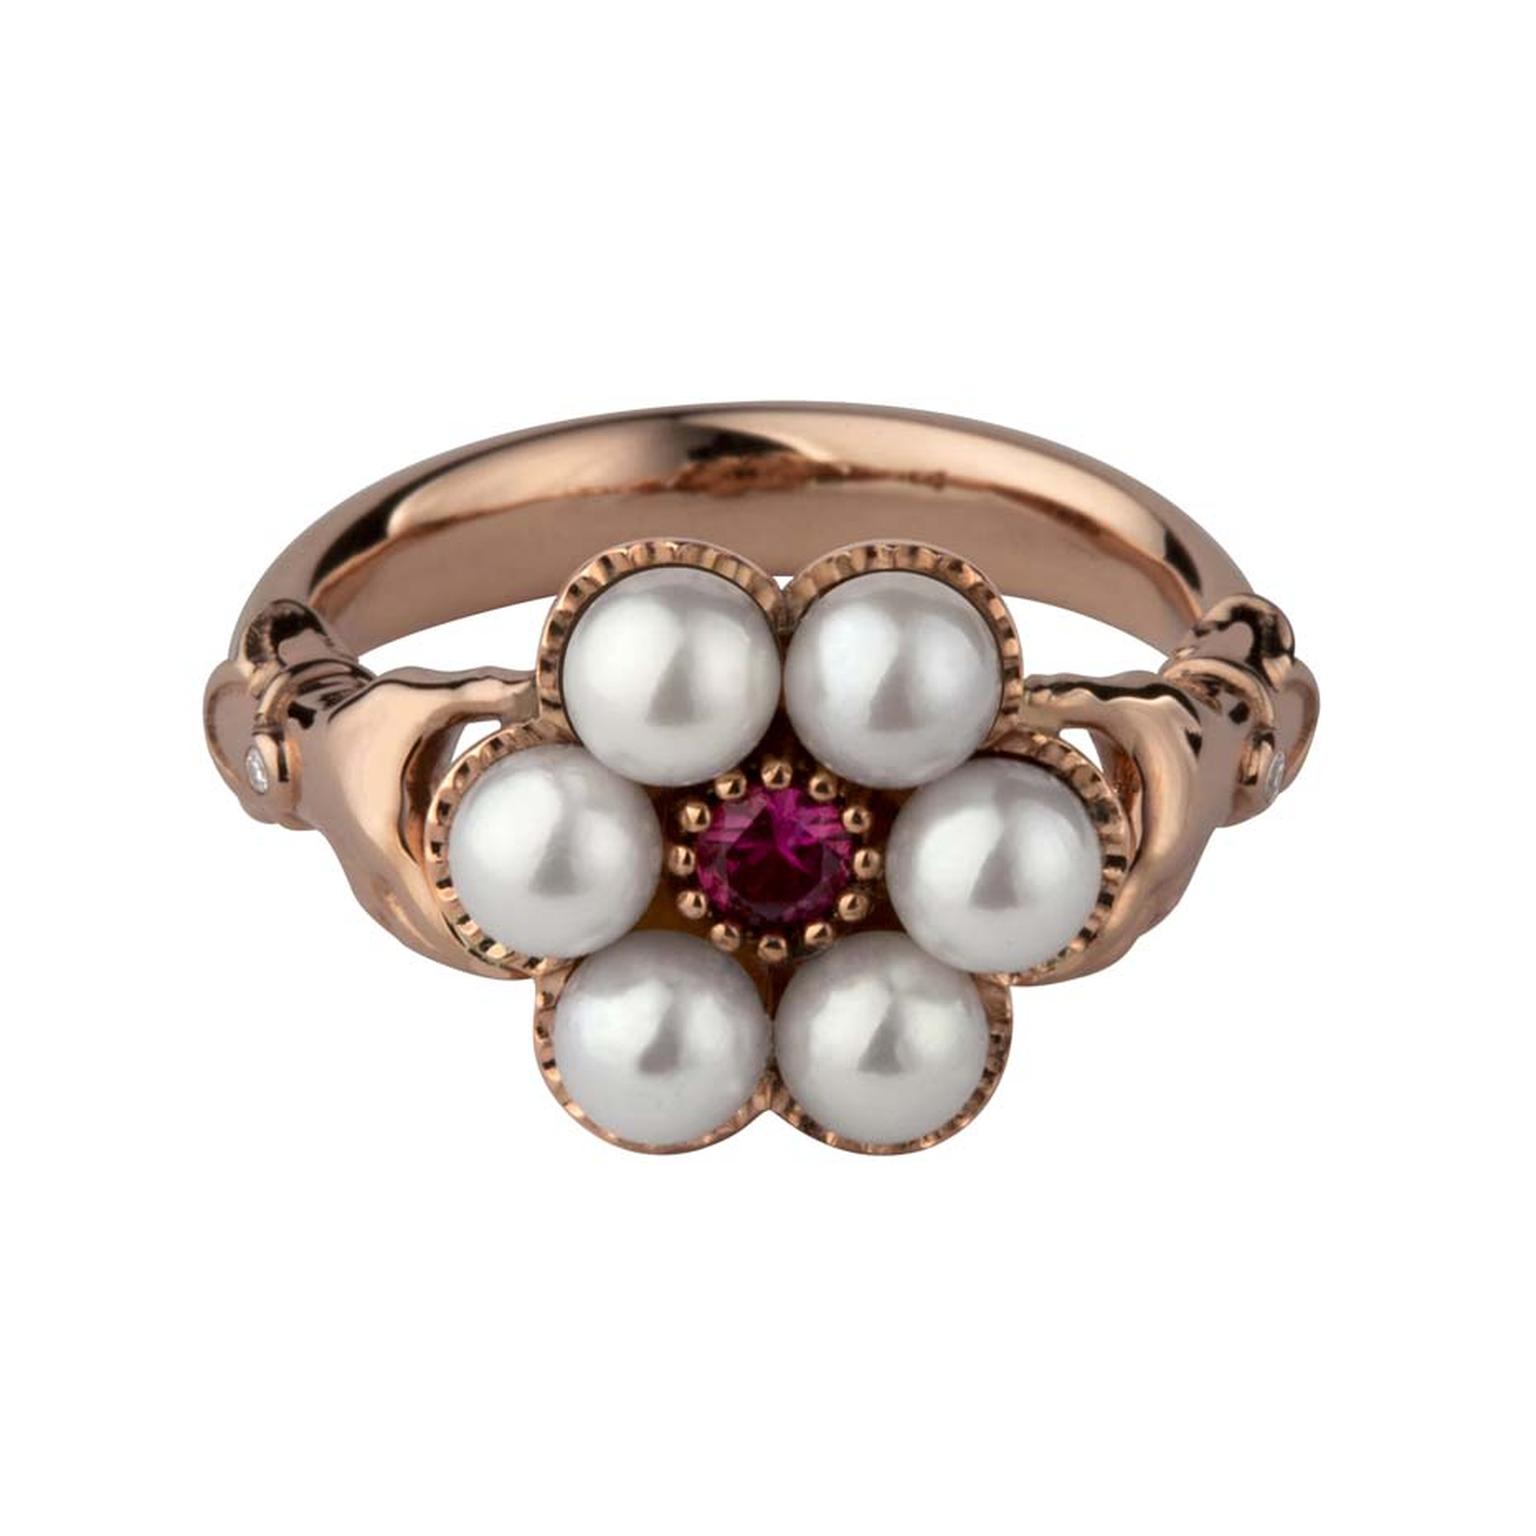 Stephen Einhorn pink gold, Akoya pearl and ruby ring from the new Posey collection (£1,820).